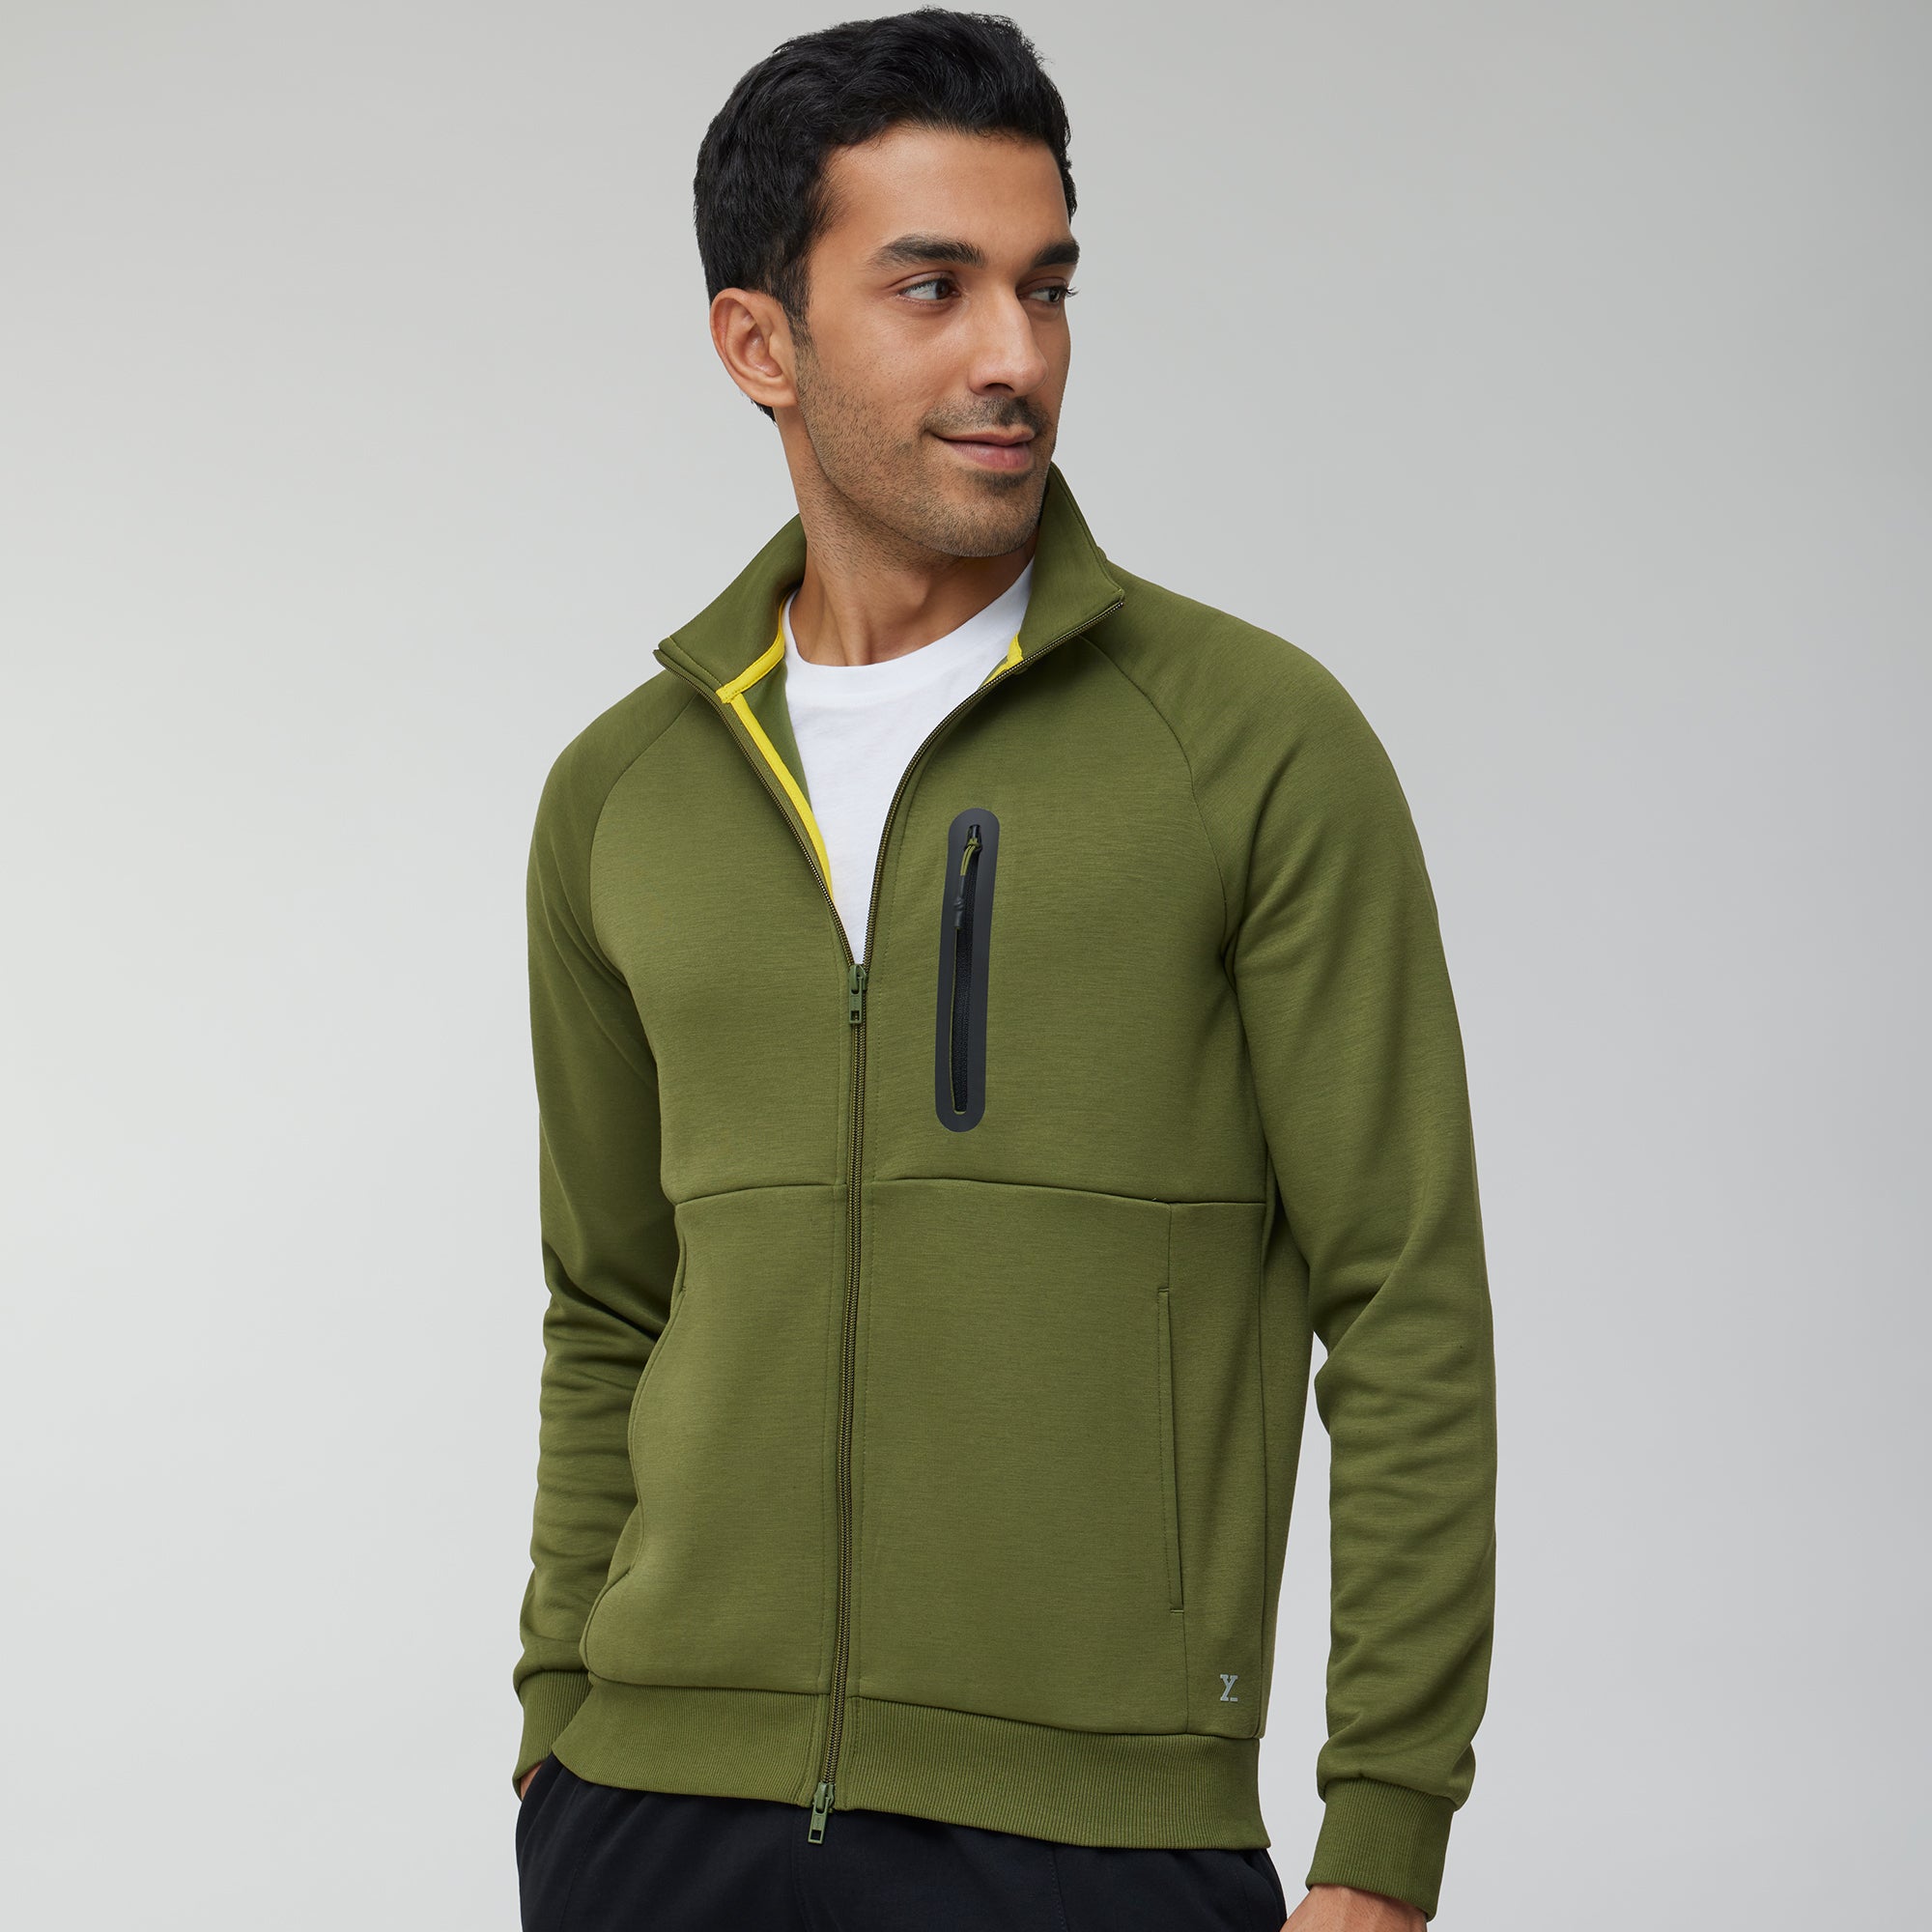 Alpha Zip Ups and Jackets For Men Olive Green -  XYXX Crew